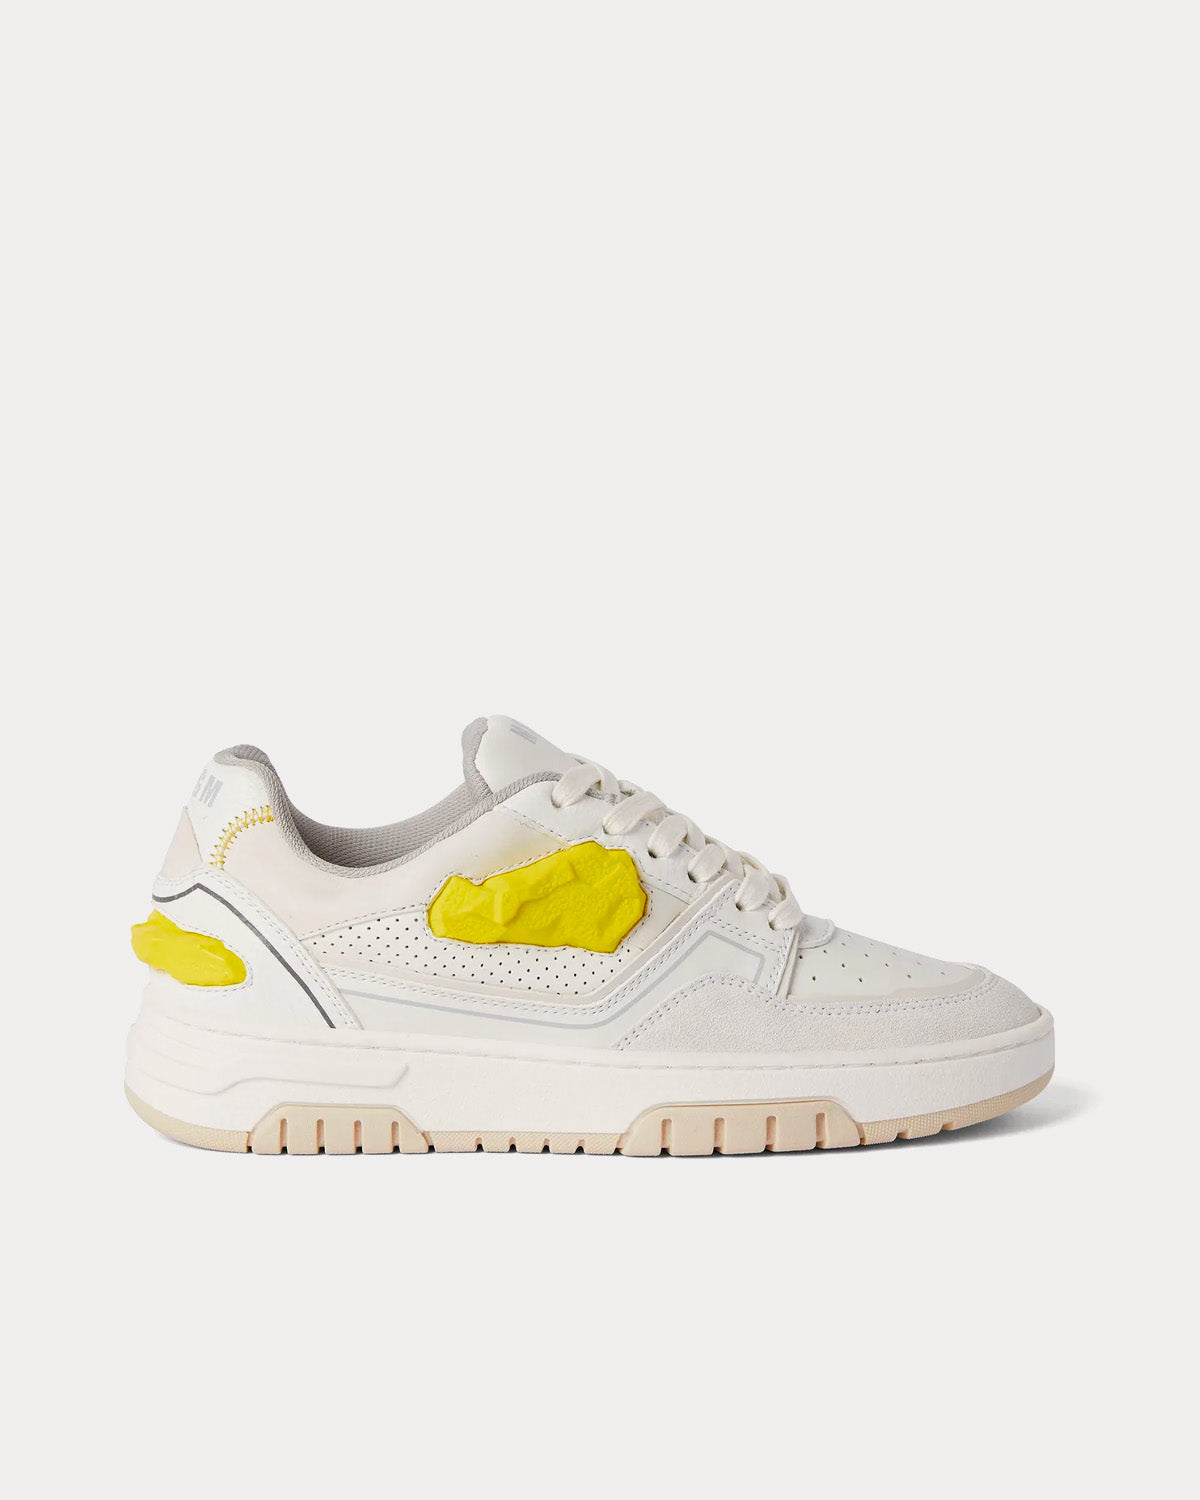 MSGM - RCK White / Yellow Low Top Sneakers